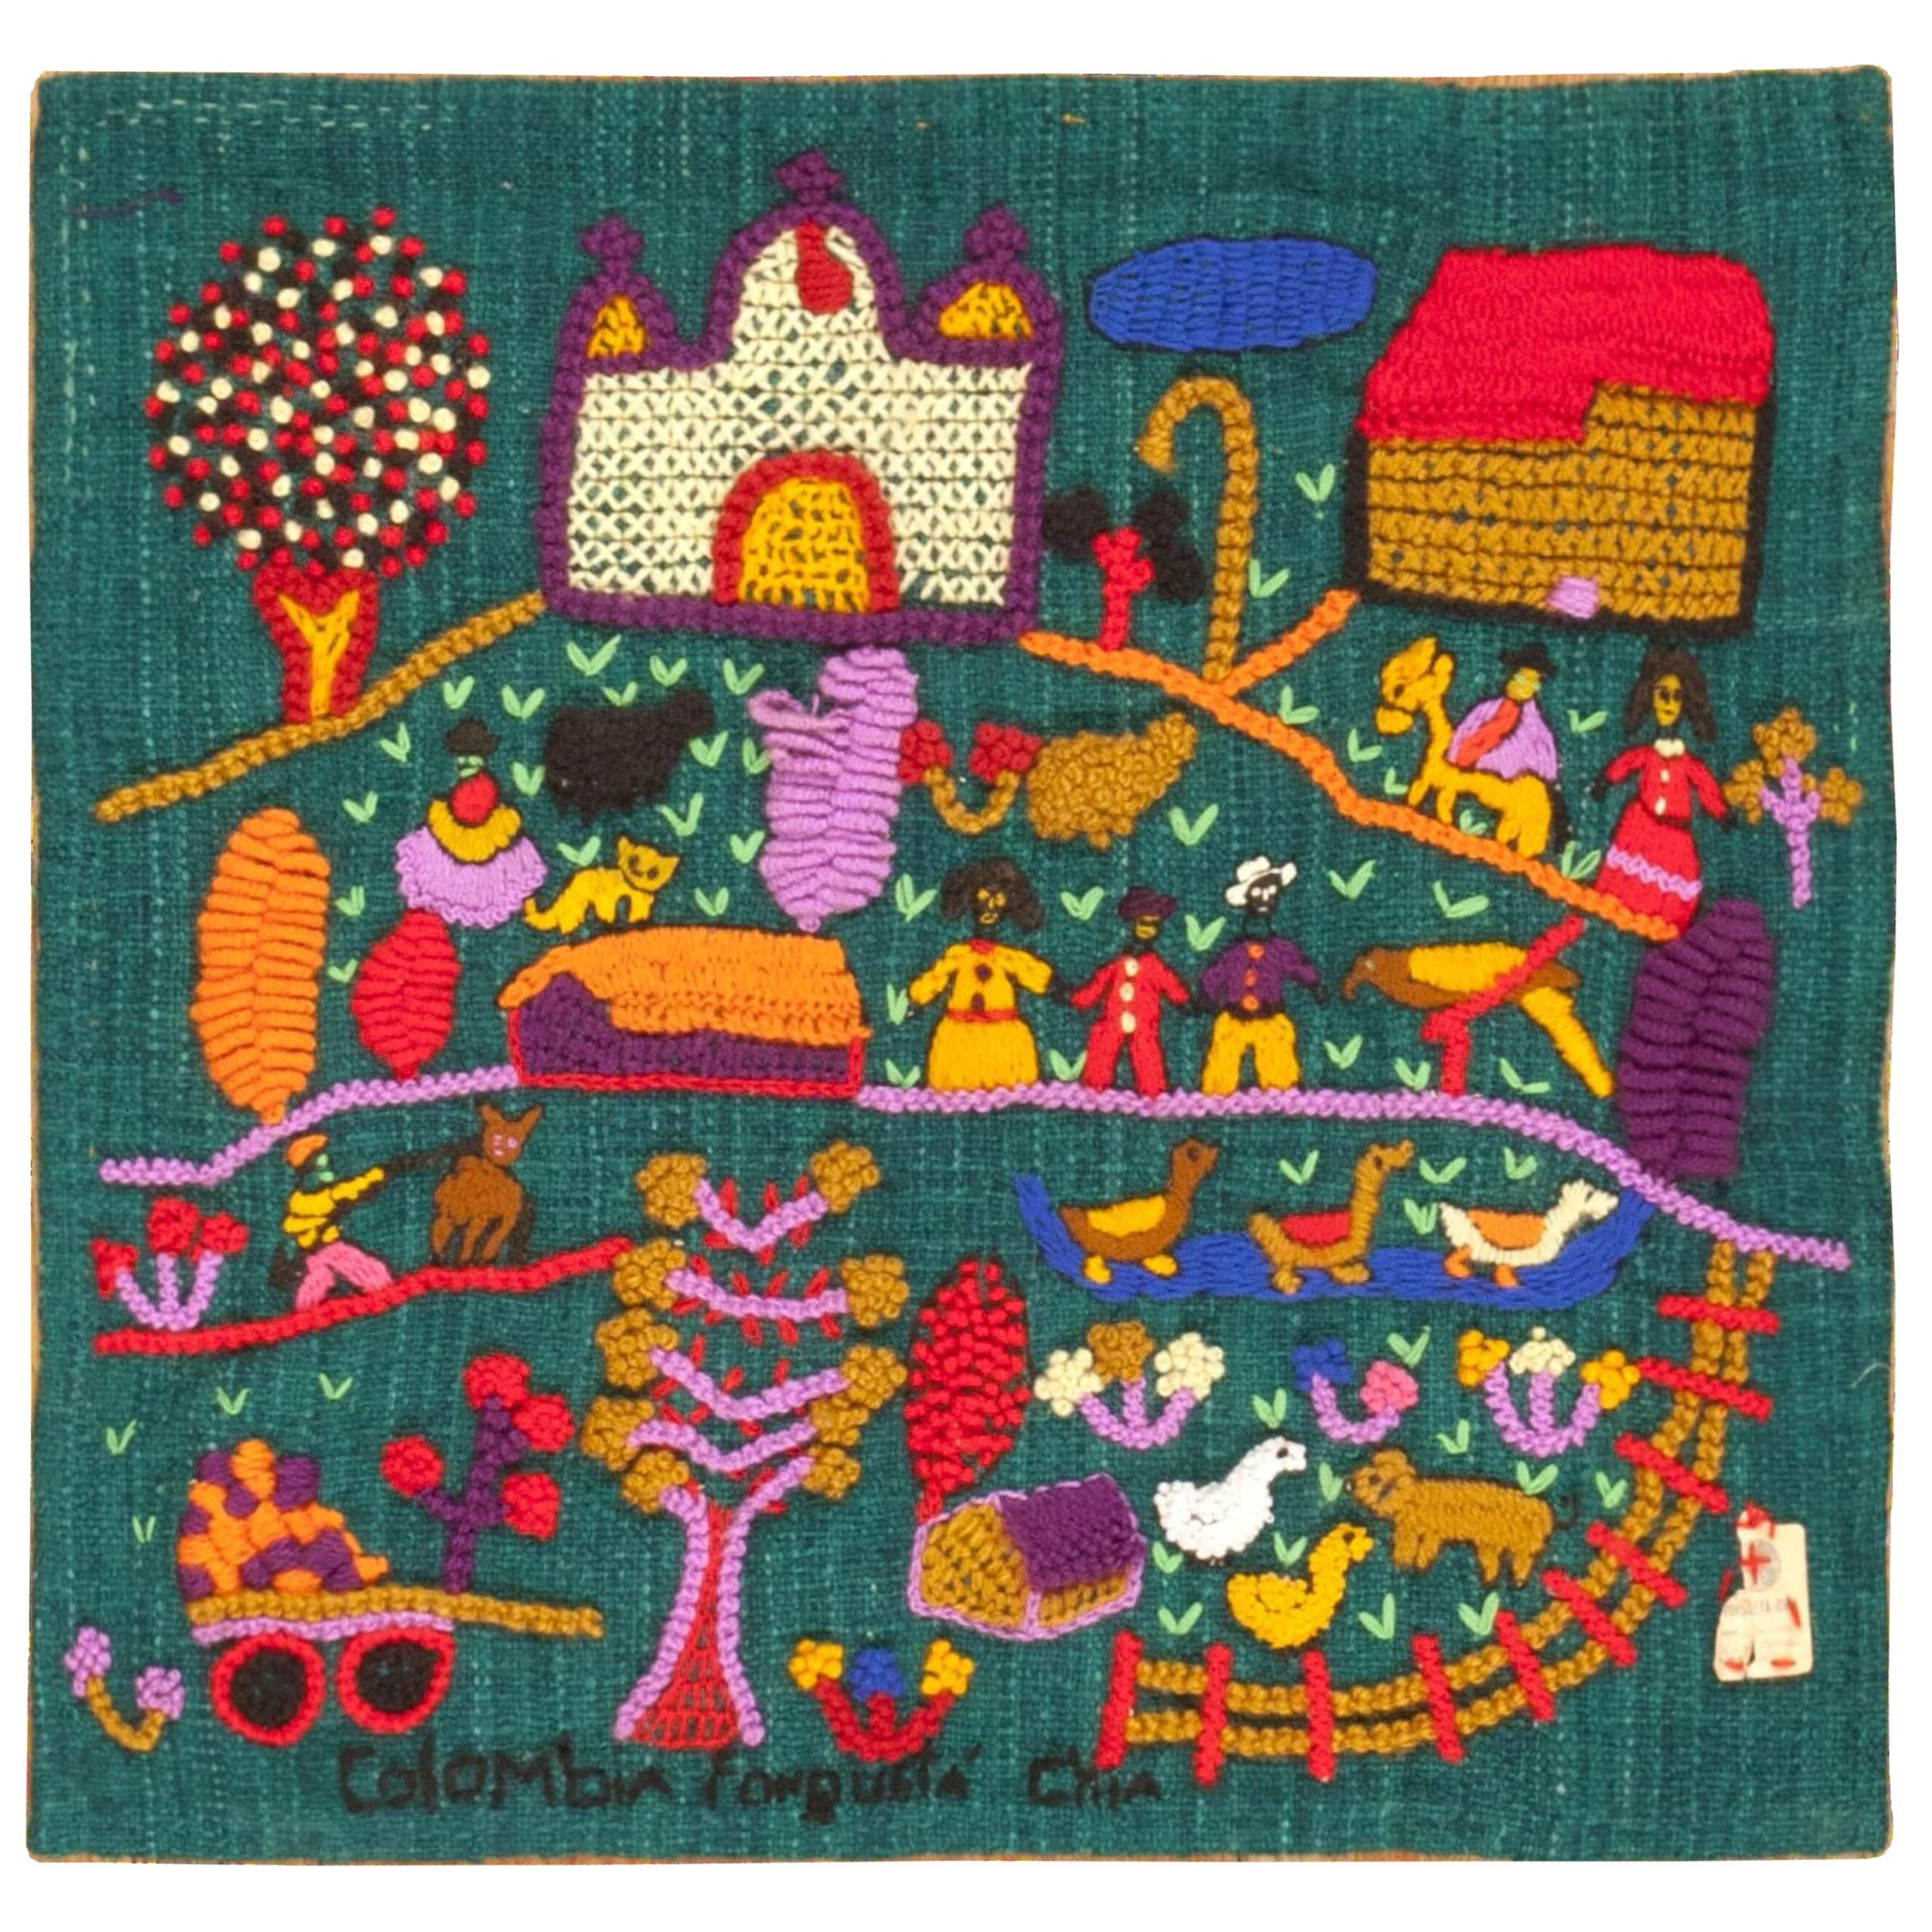 Beautiful Vintage Needlepoint / Colombian Arpillera Embroidery 2'1" x 2'3" For Sale